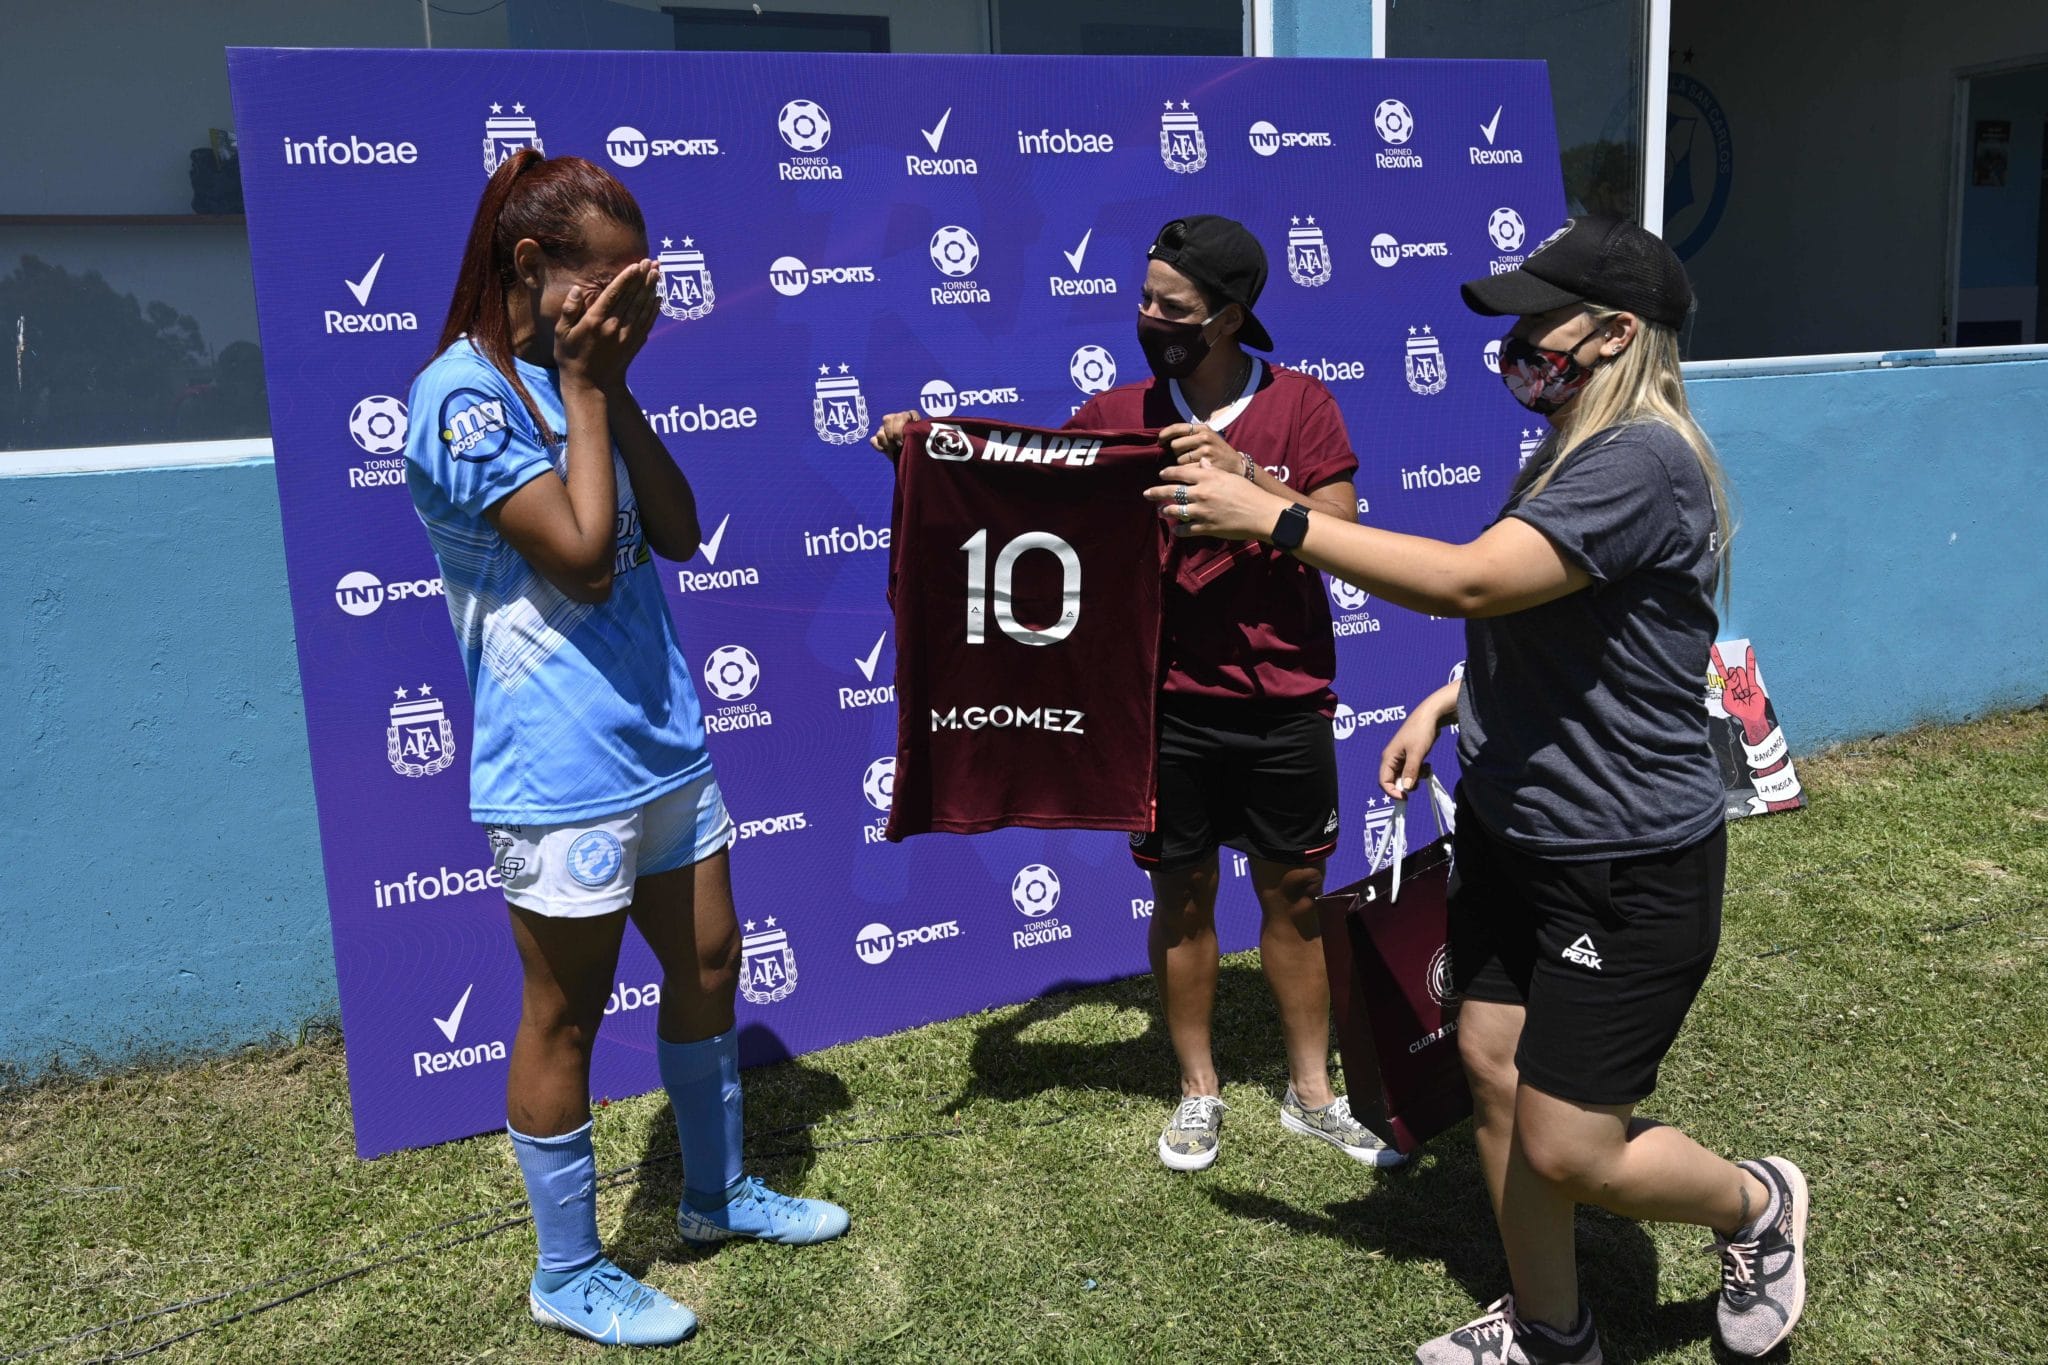 Mara Gomez of Villa San Carlos reacts emotionally as she is given a jersey of Lanus with her name on it 